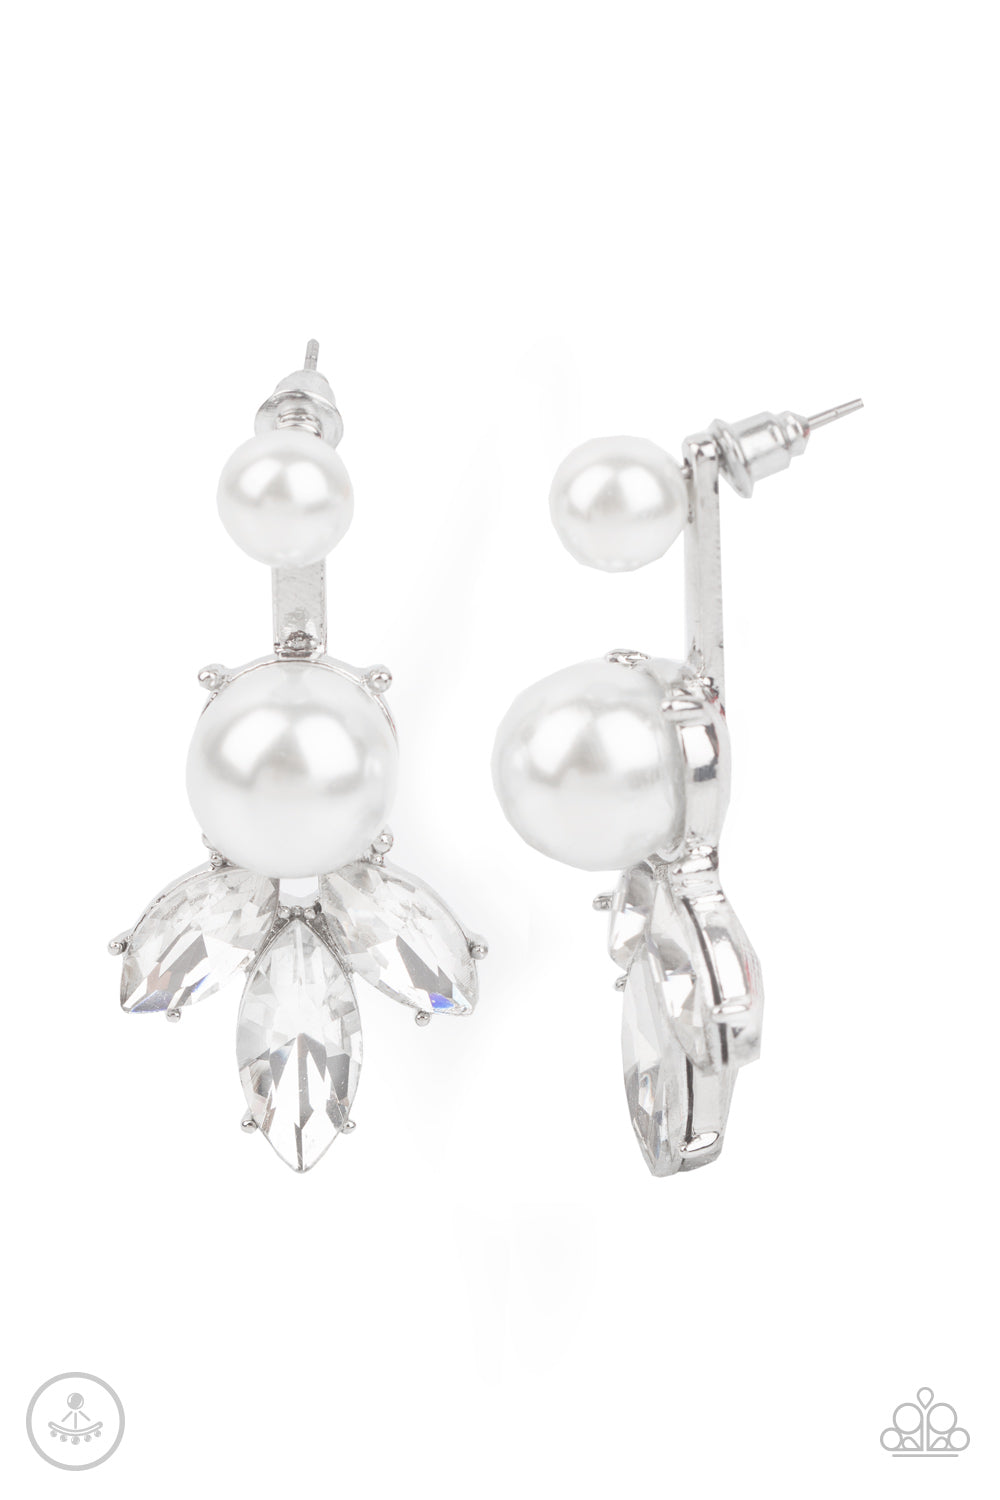 Extra Elite - White Pearl Double Back Earrings - Princess Glam Shop